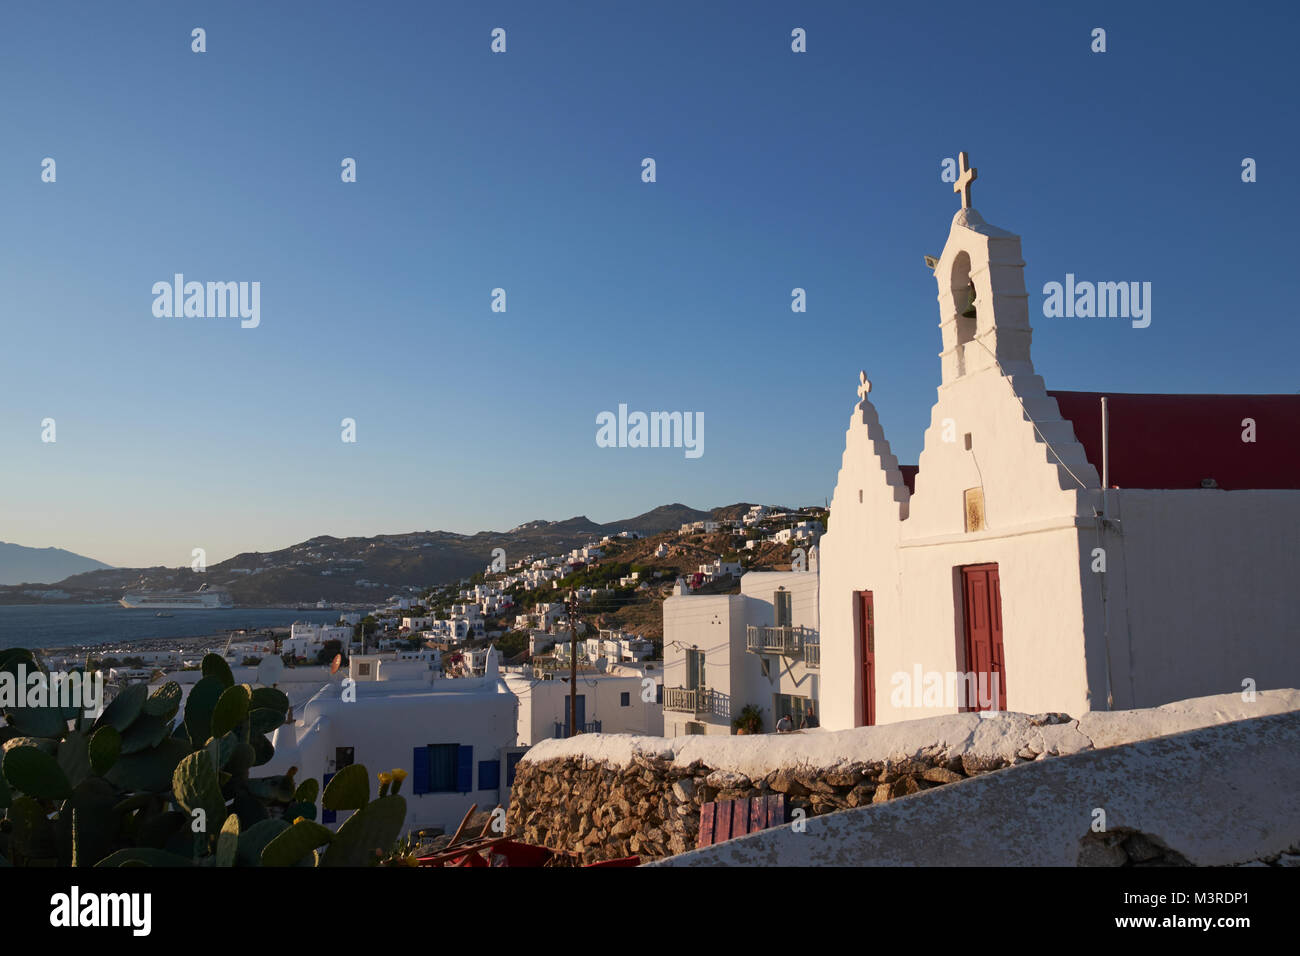 A small church overlooking the town of Mykonos, Cyclades Islands, Aegean Sea, Greece. Stock Photo